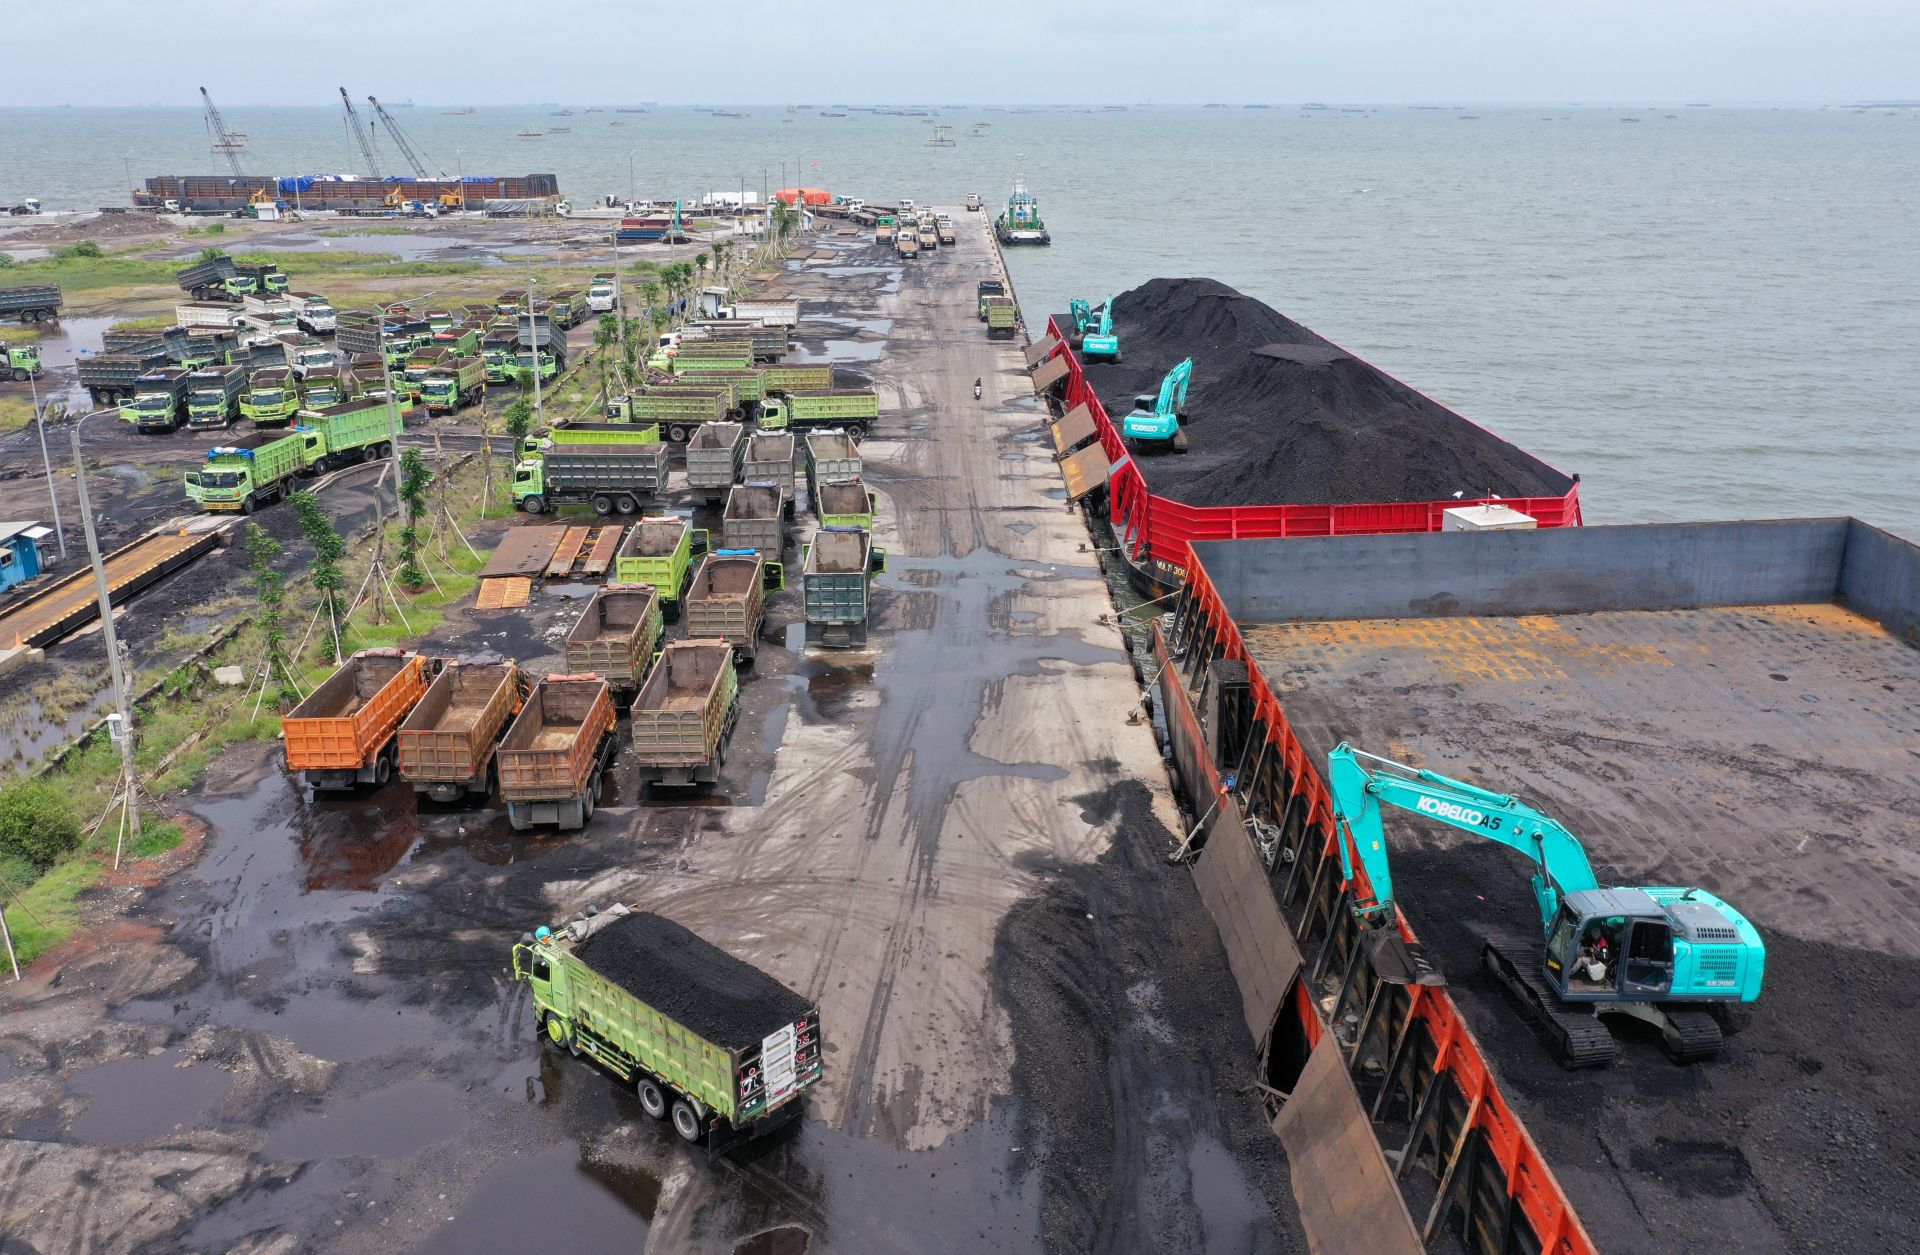 Machinery is used to load coal onto trucks at a port in Jakarta, Indonesia, on Jan. 17, 2022. 